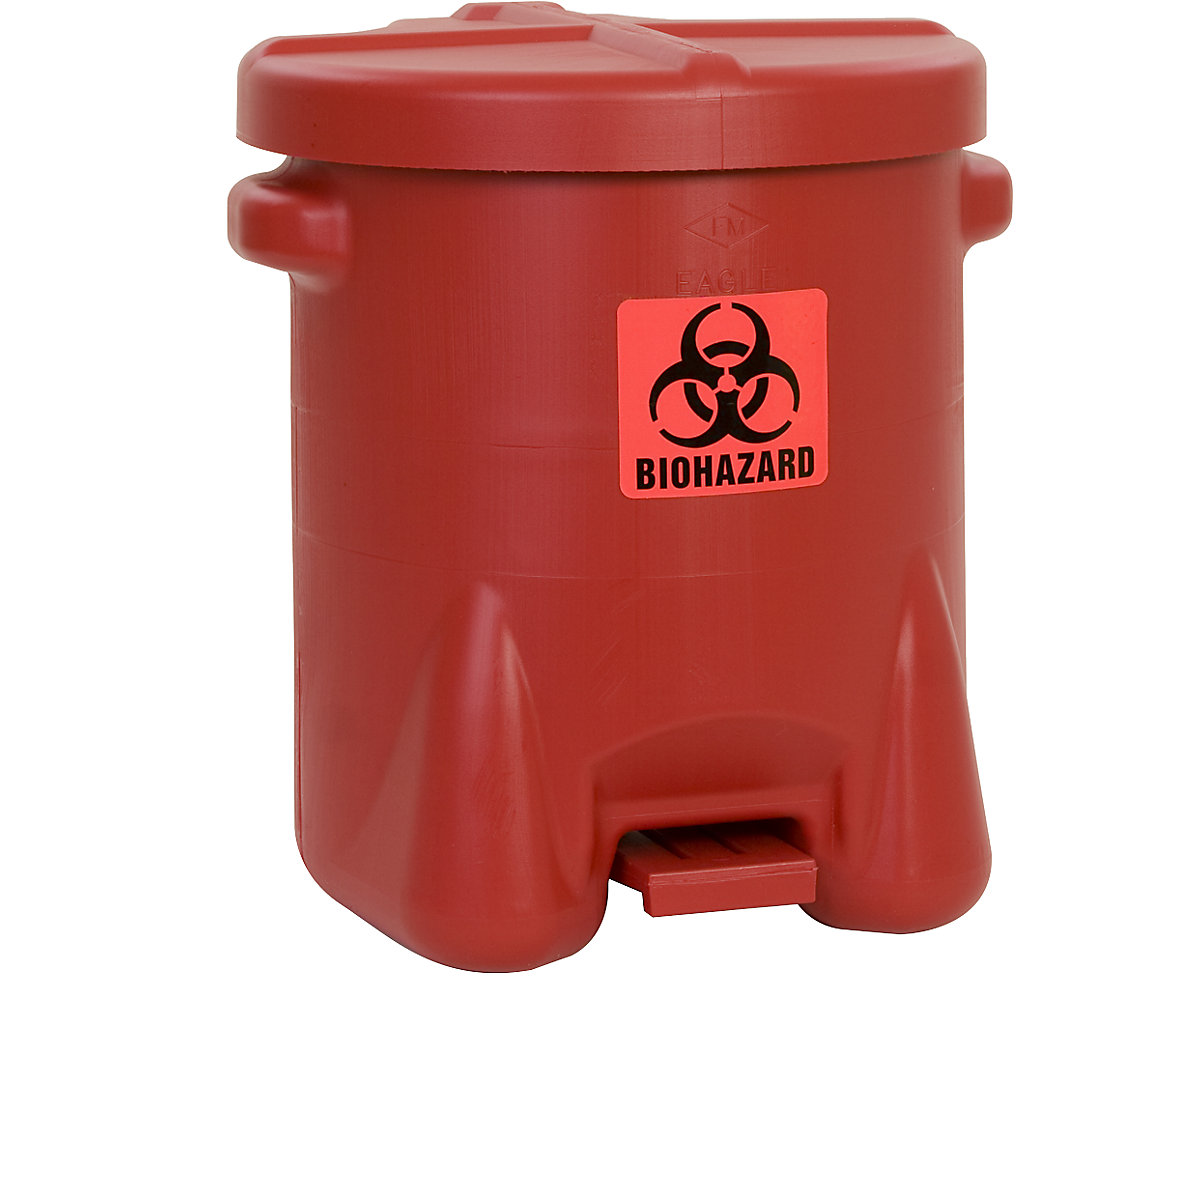 PE safety disposal can for biohazardous waste - Justrite